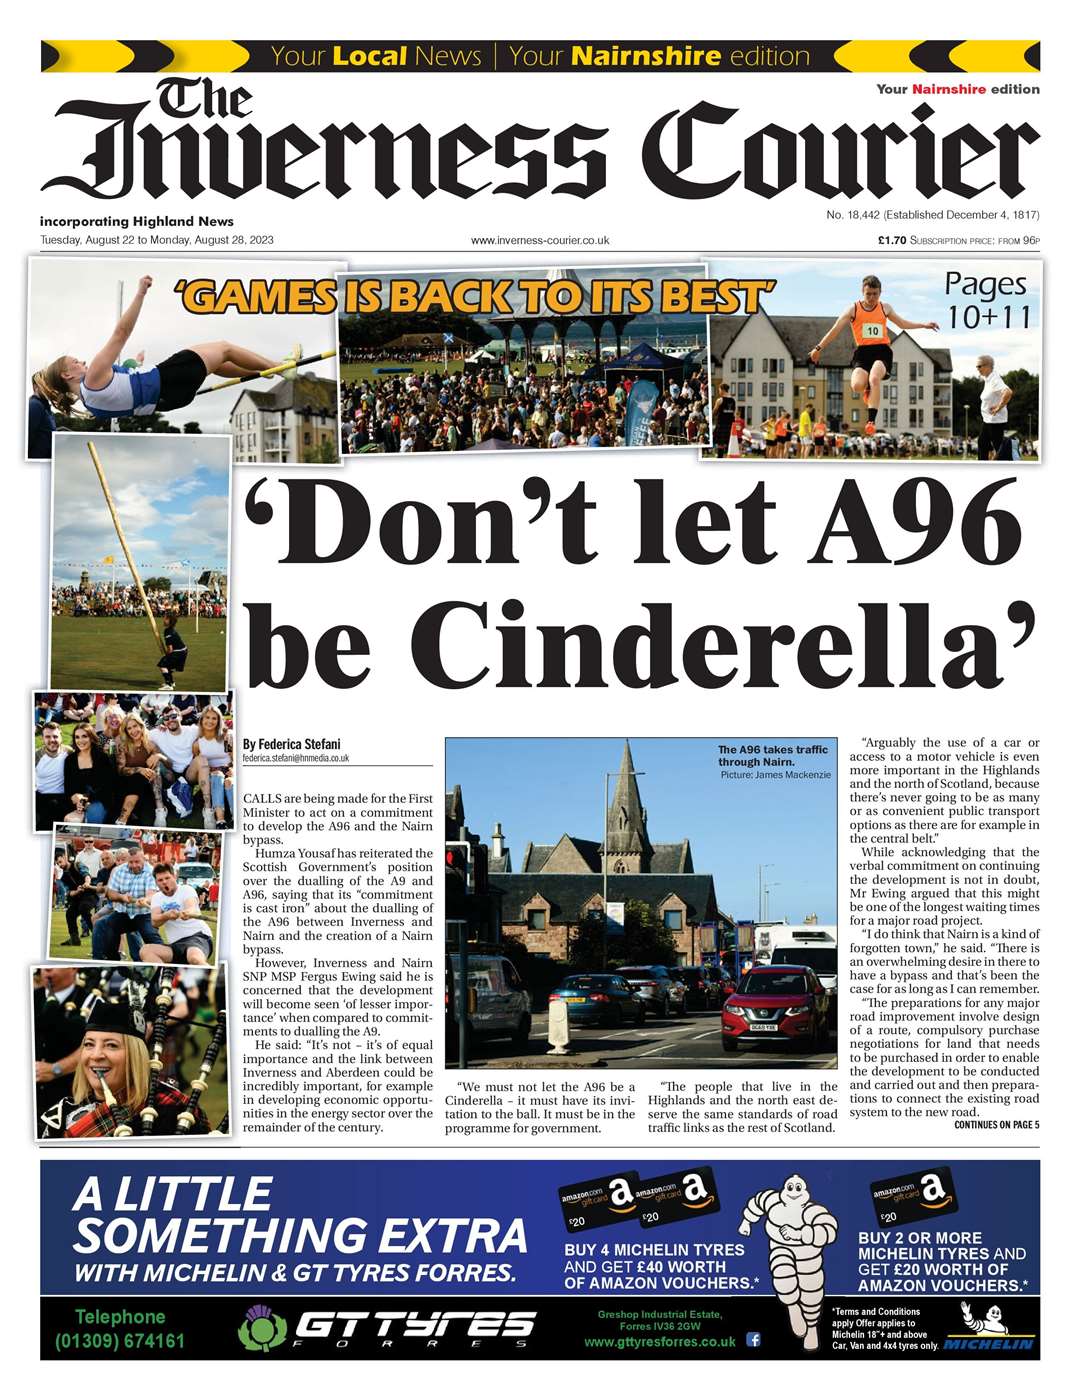 The Inverness Courier (Nairnshire edition), August 22, front page.